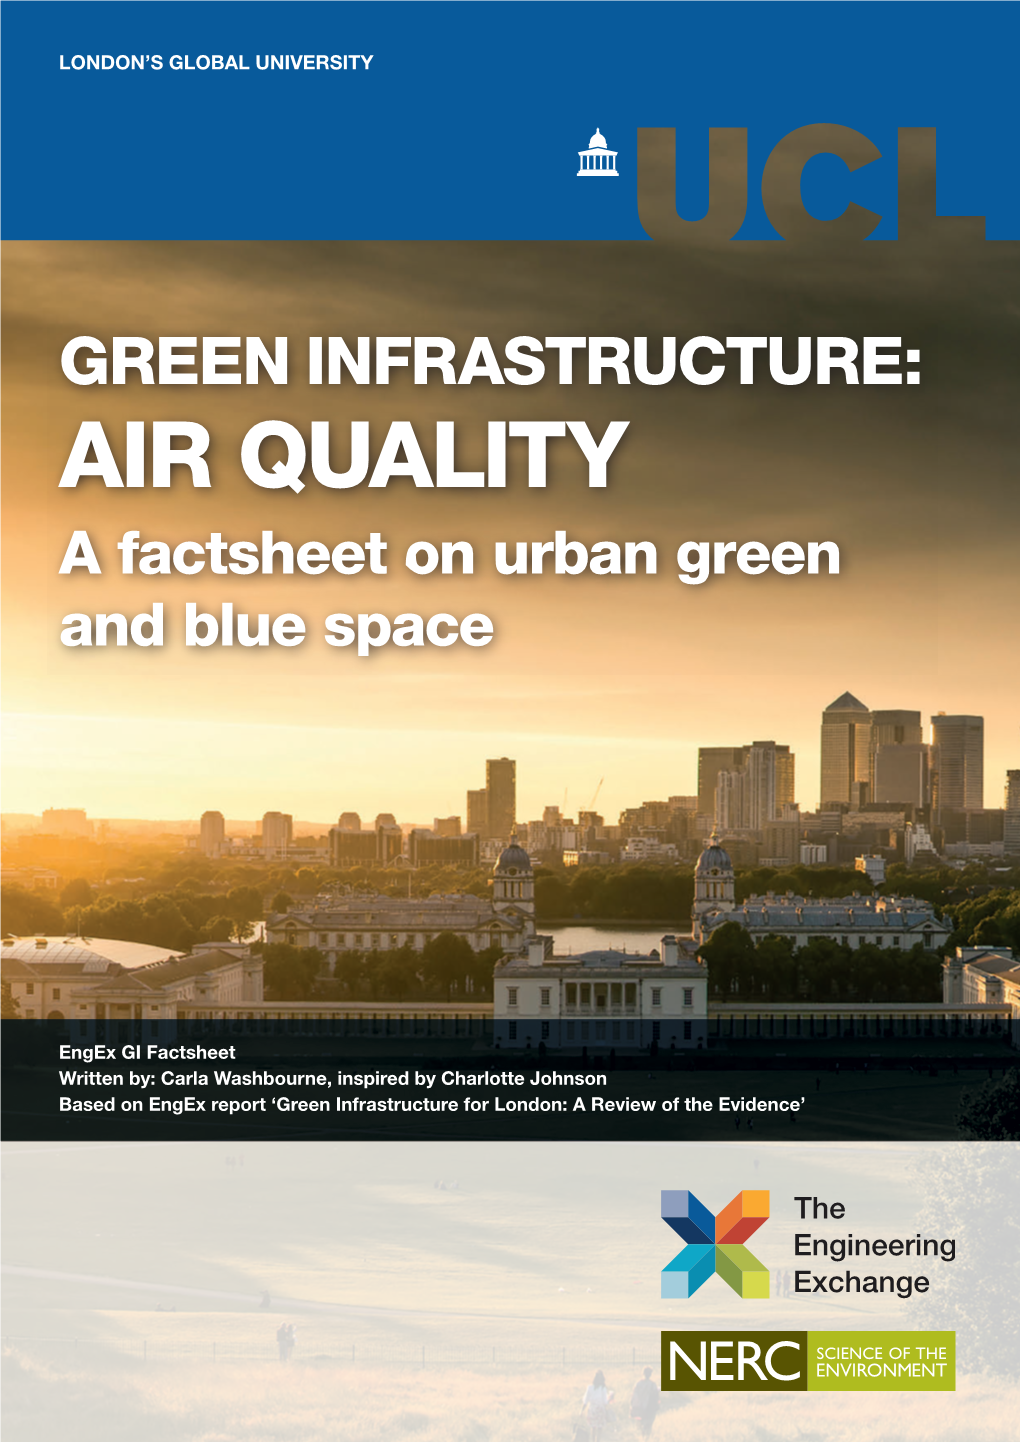 GREEN INFRASTRUCTURE: AIR QUALITY a Factsheet on Urban Green and Blue Space